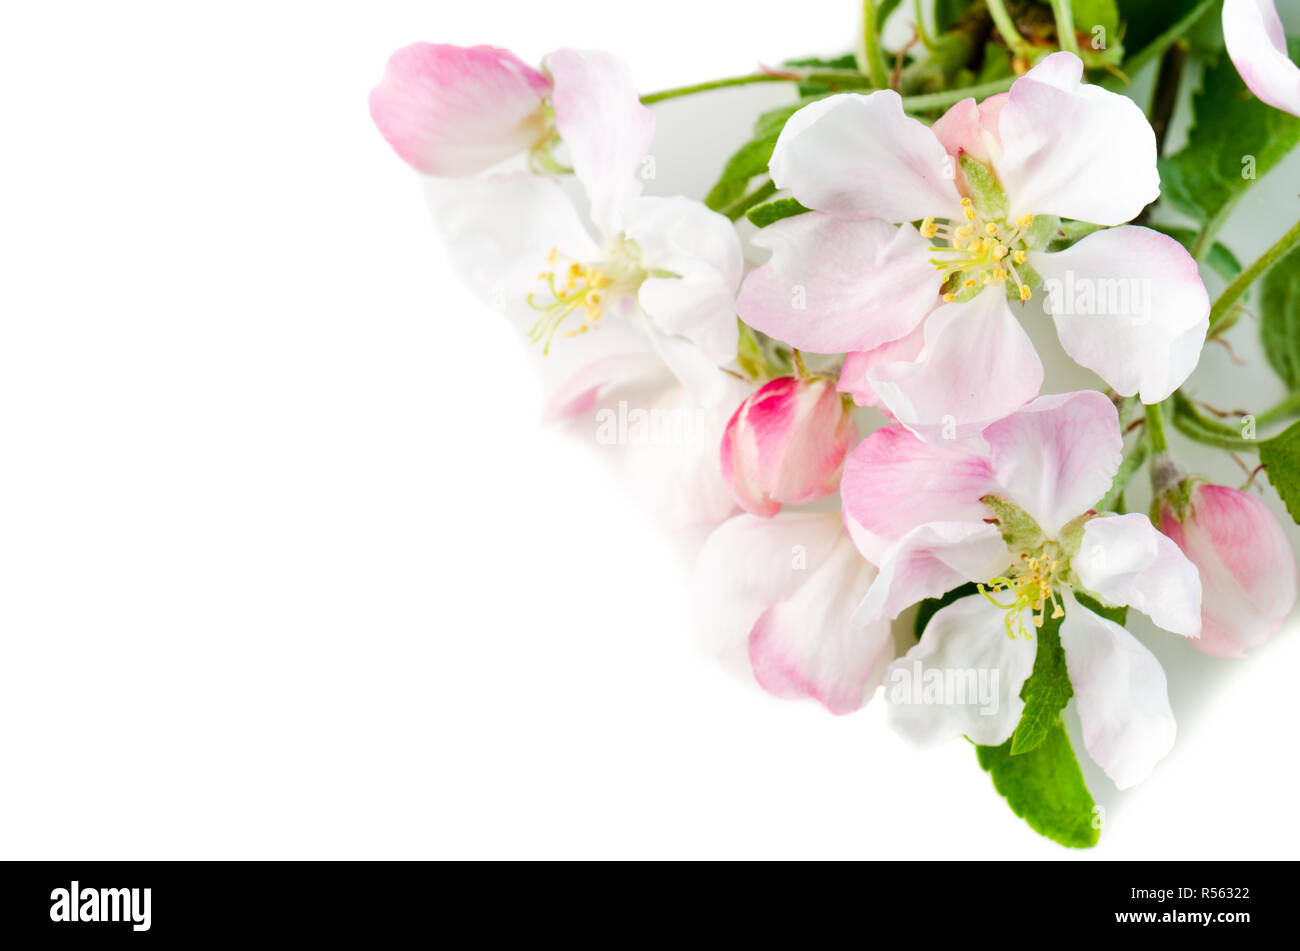 Branch of a blossoming apple-tree on a white background, close-u Stock Photo